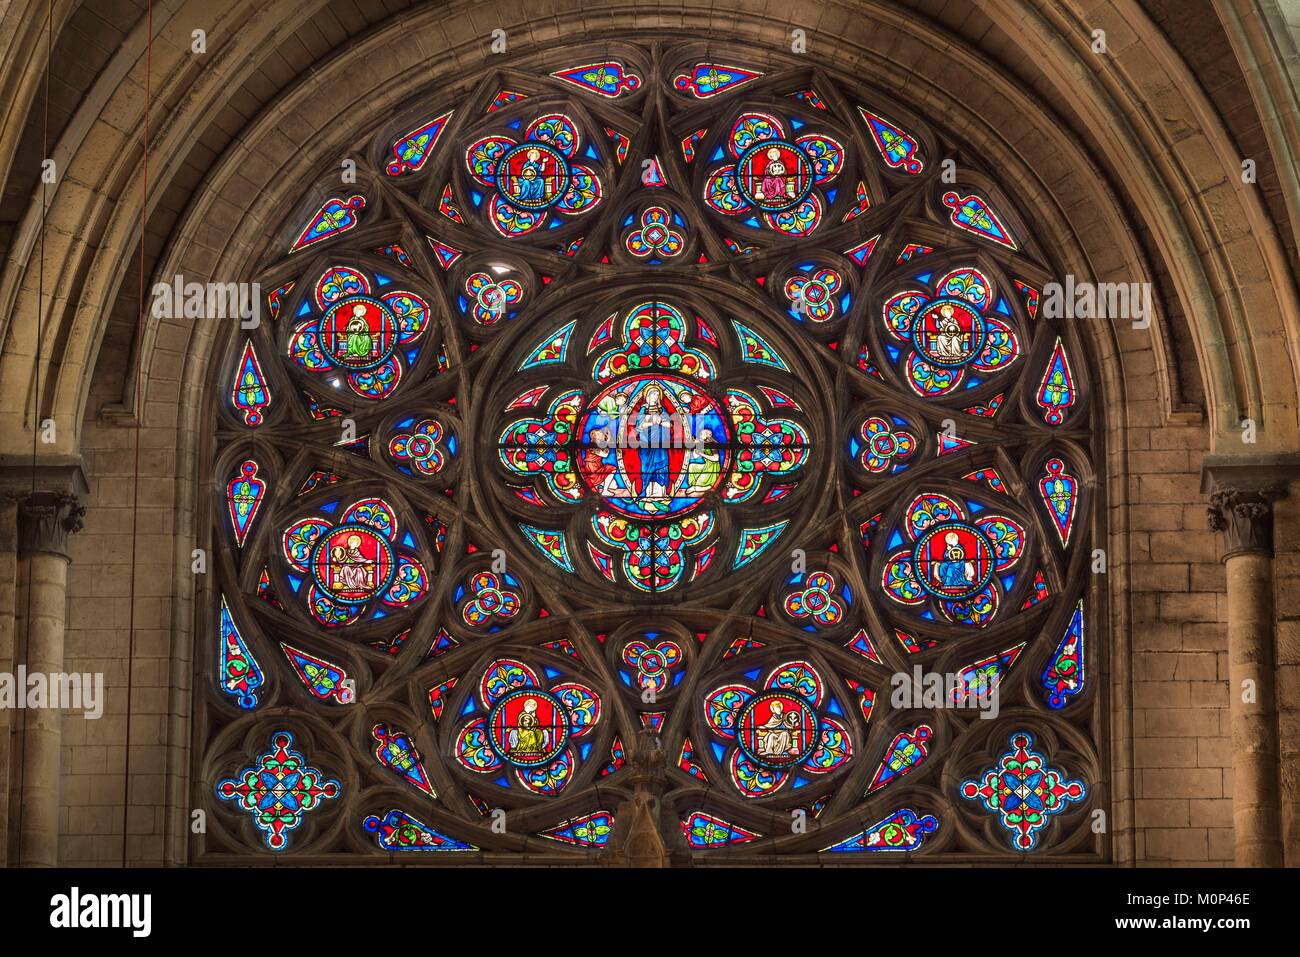 France,Pas de Calais,Saint Omer,the Gothic cathedral of Notre Dame de Saint Omer,stained glass window Stock Photo